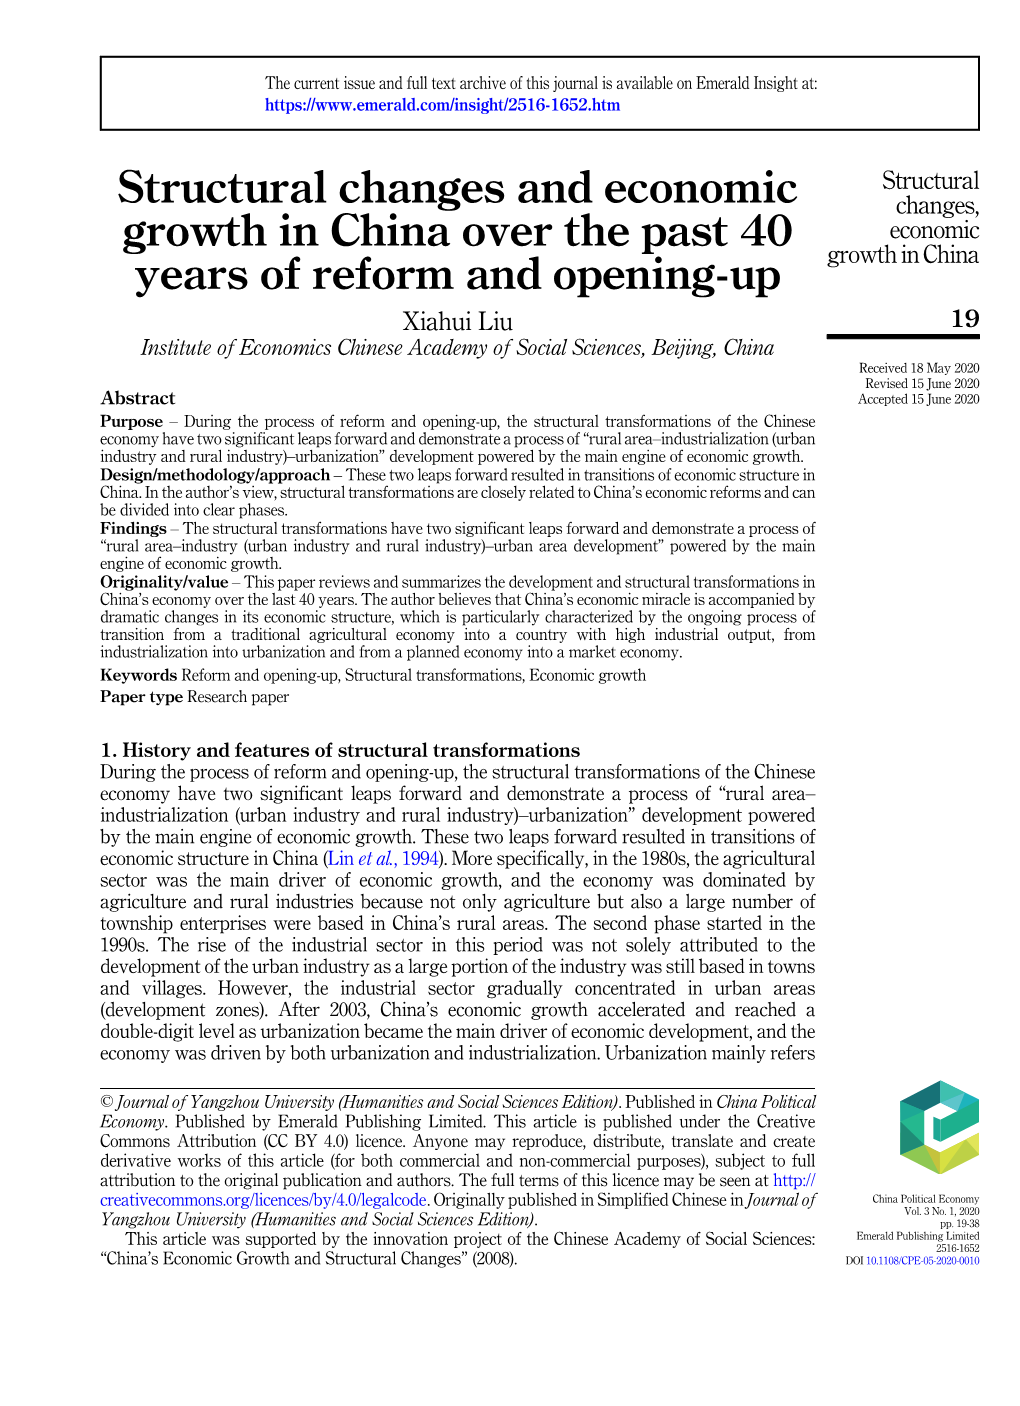 Structural Changes and Economic Growth in China Over the Past 40